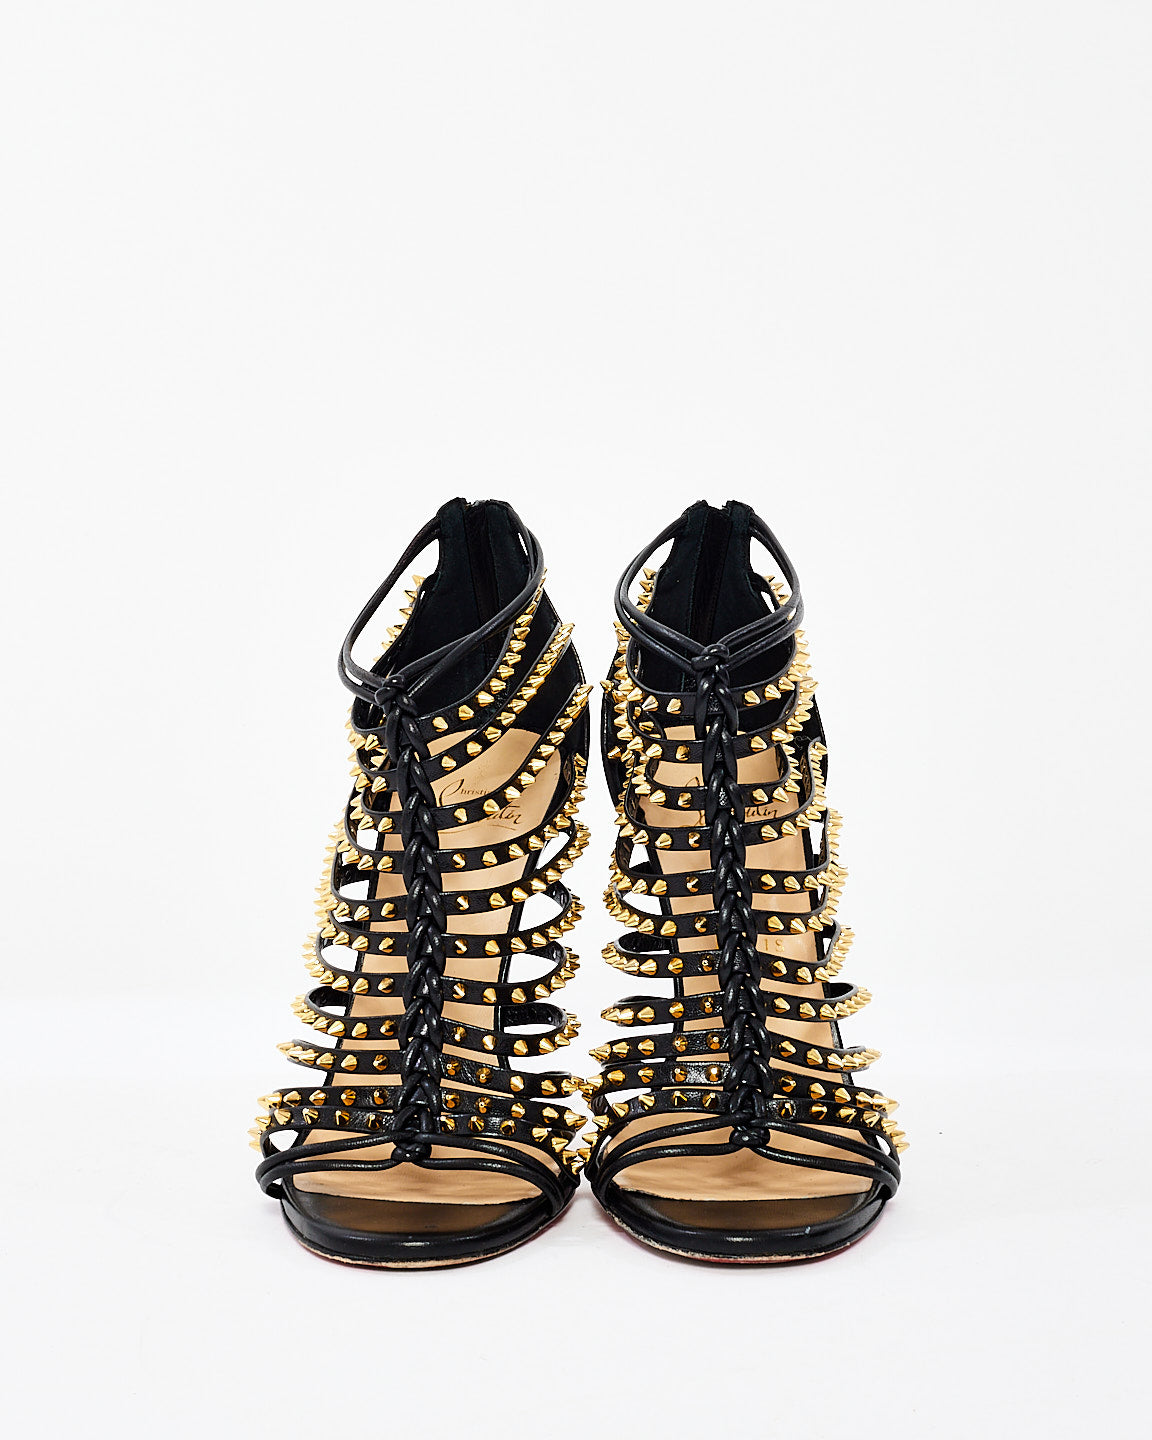 Christian Louboutin Black Studded Leather Millaclou 100mm Cage Sandals - 37